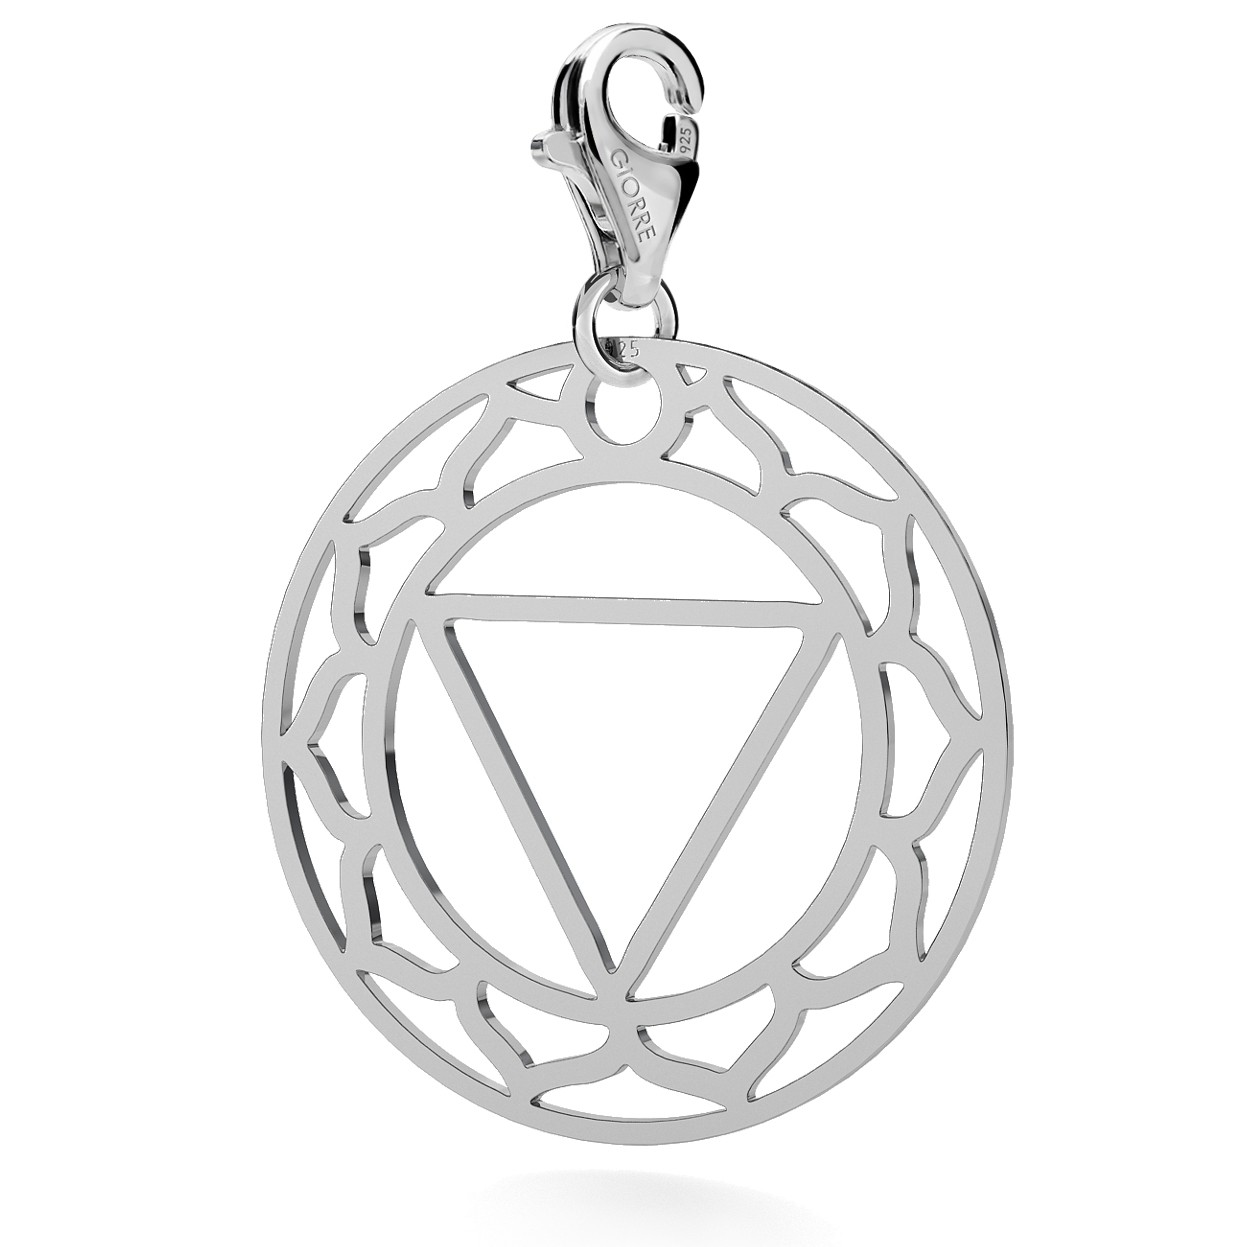 CHARM 72, NAVEL CHAKRA, STERLING SILVER (925) RHODIUM OR GOLD PLATED